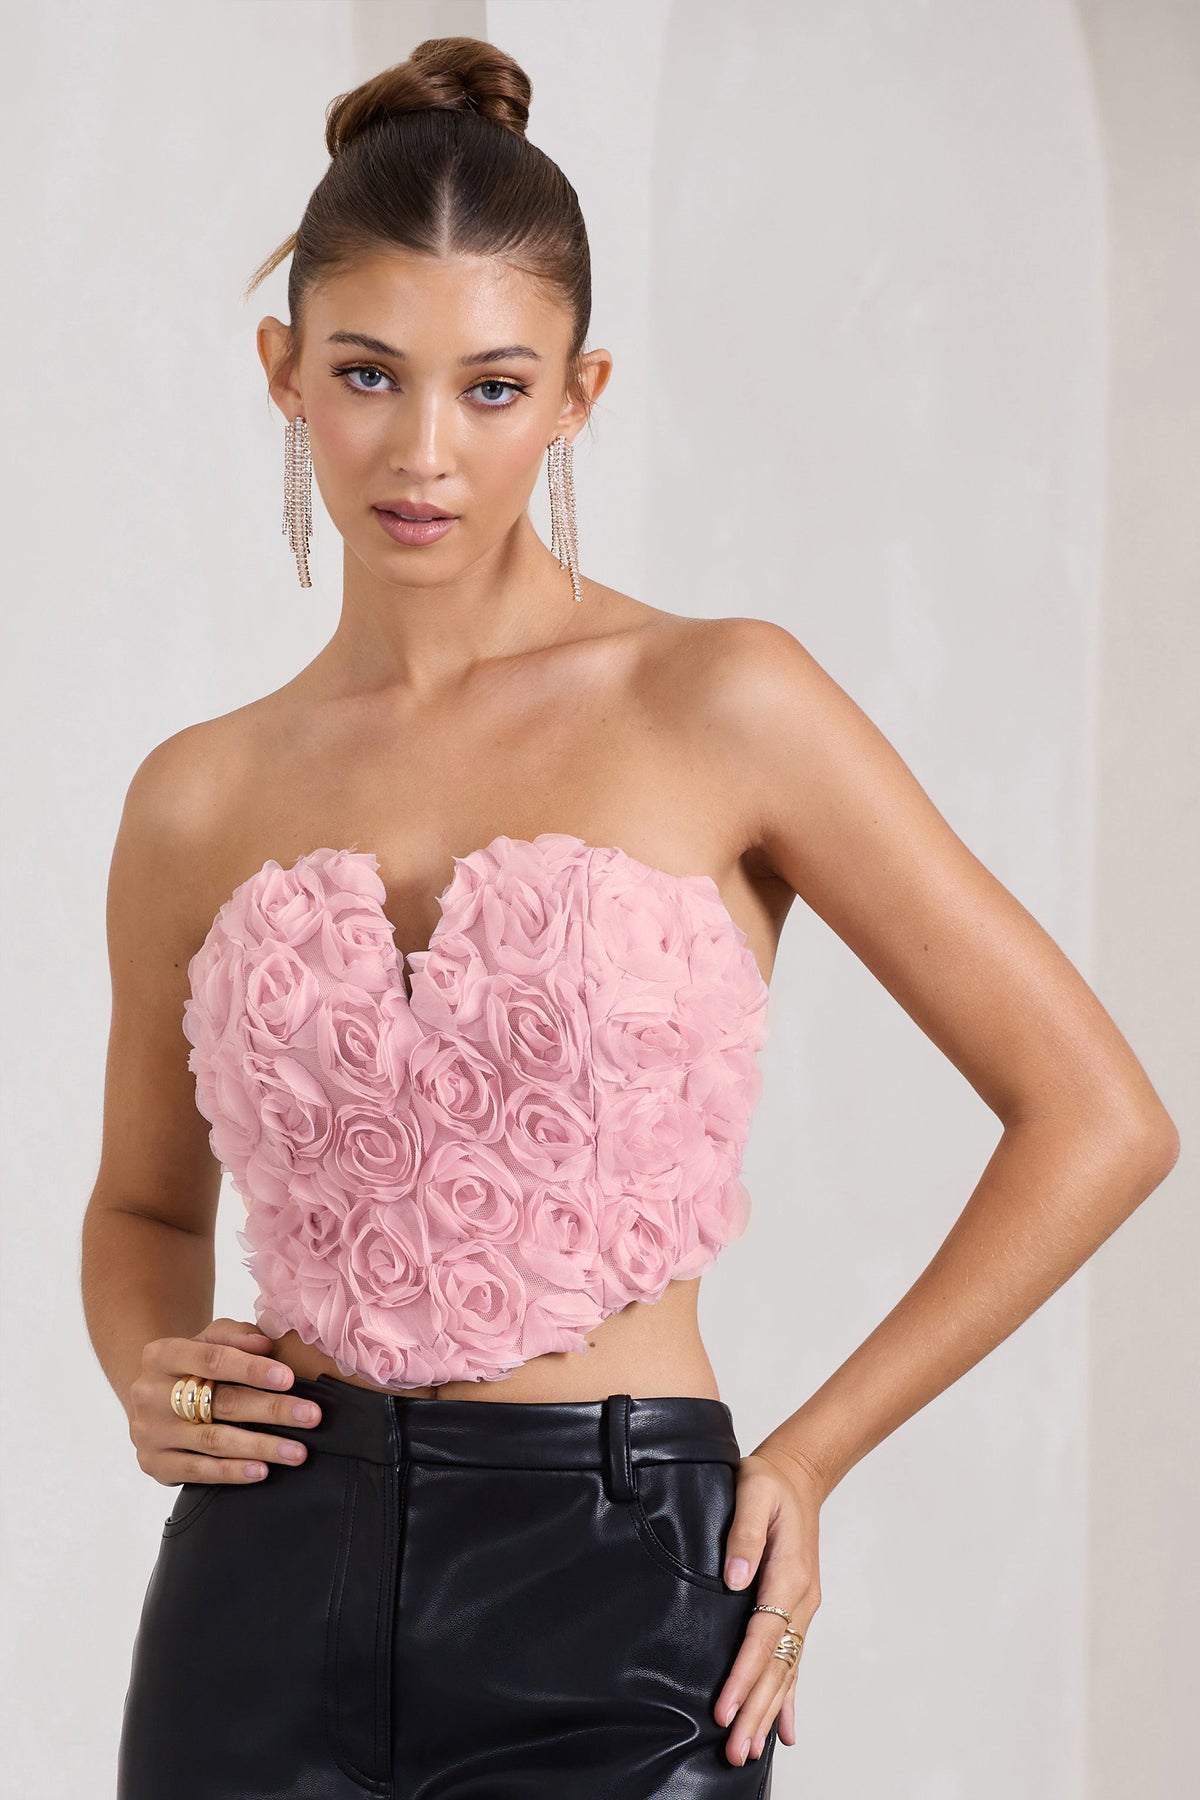 Sensual Flowers Giada Structured Top